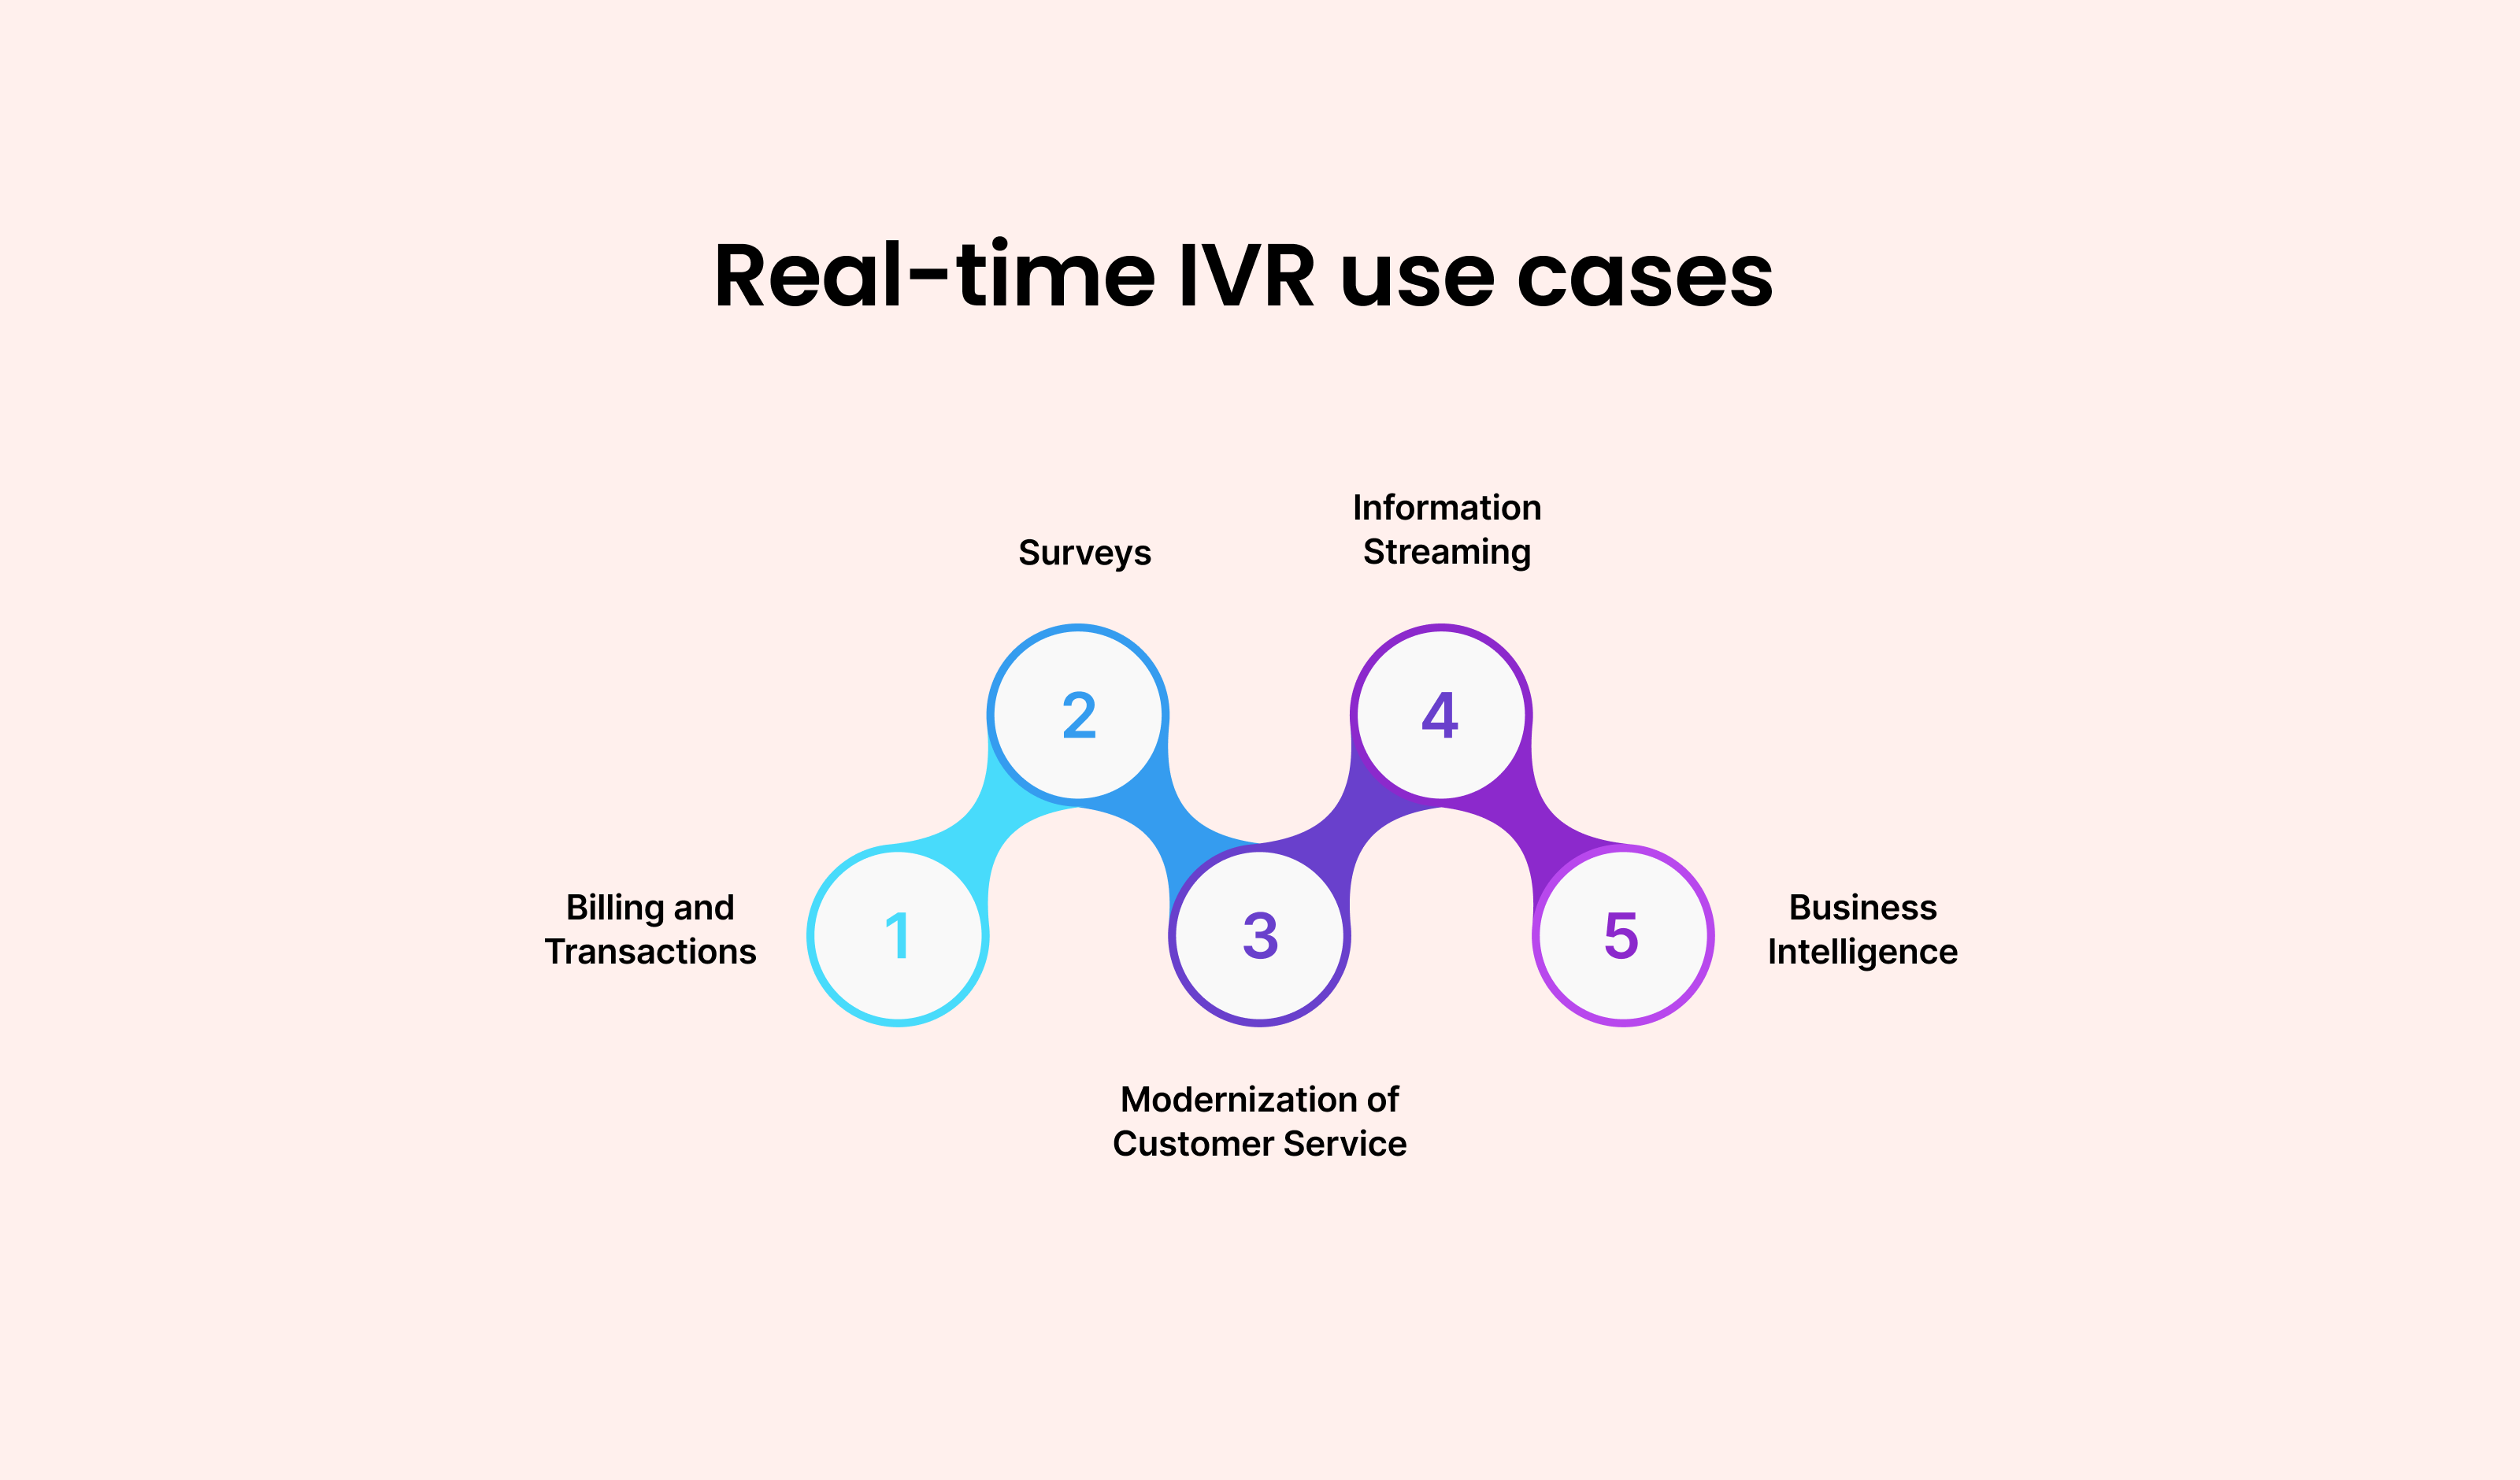 Real-time IVR Use Cases: